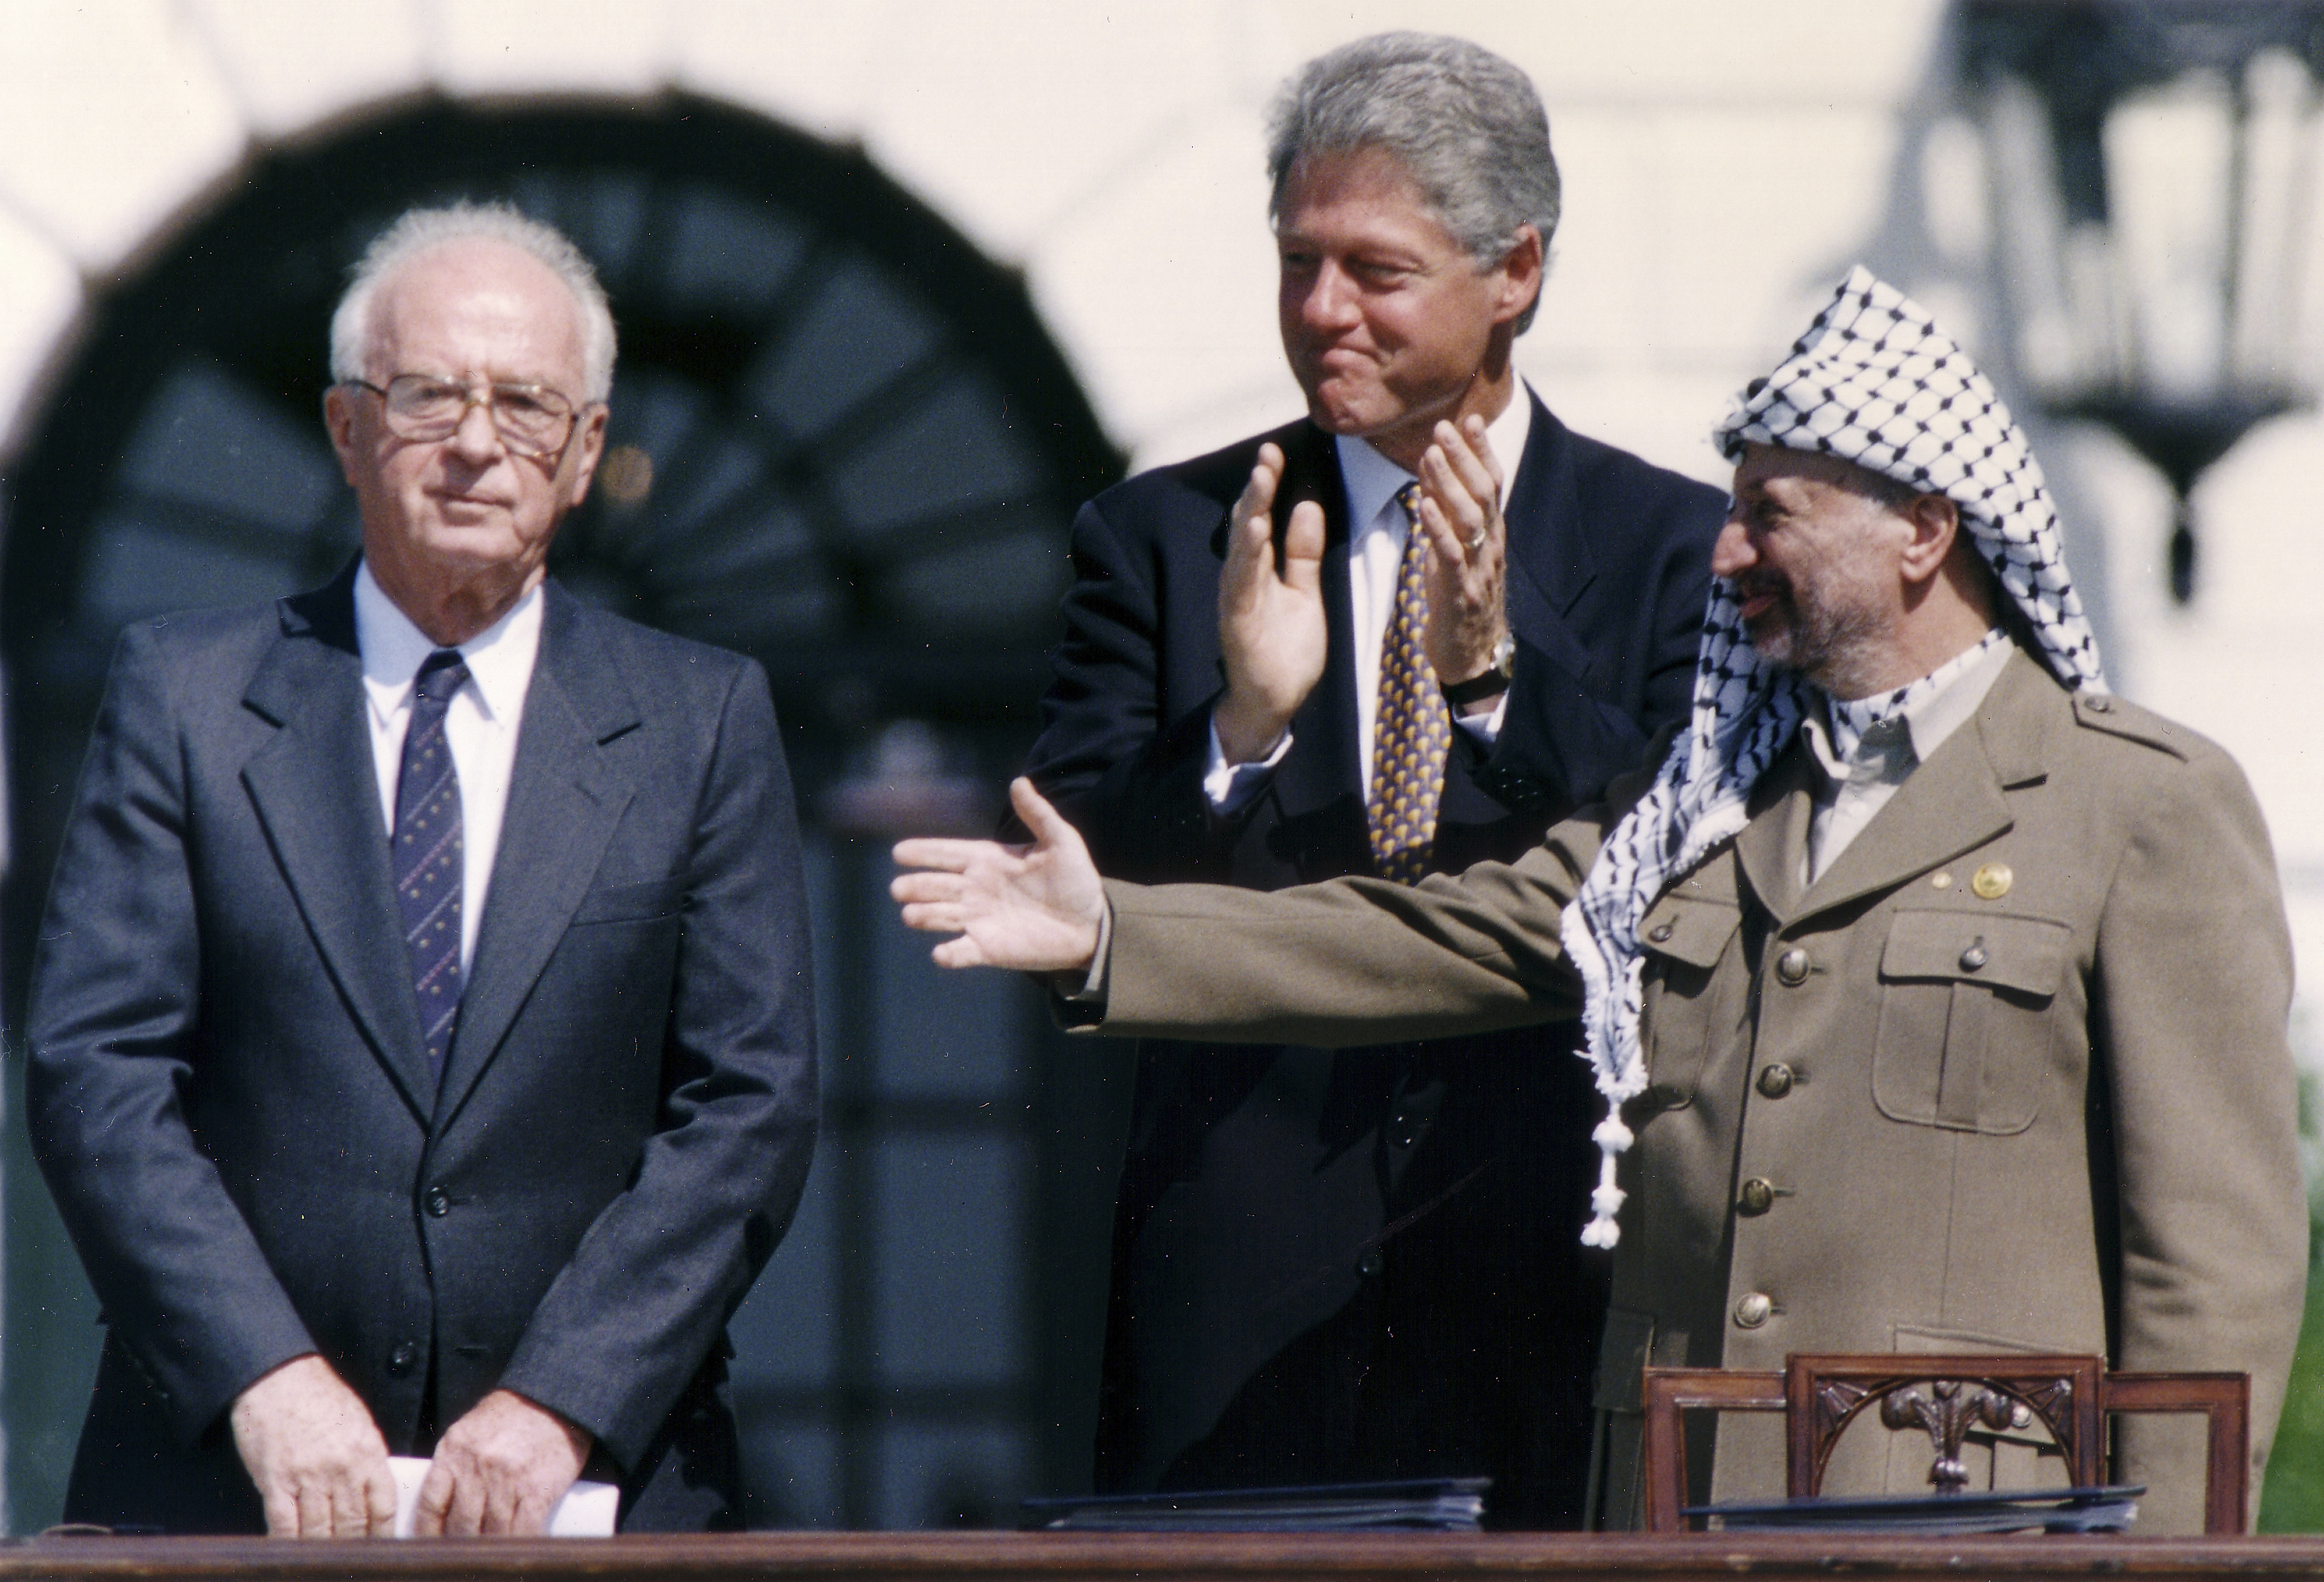 US President Bill Clinton stands between PLO leader Yasser Arafat and Israeli Prime Minister Yitzhak Rabin as they shake hands in September 1993 in Washington after signing the first Oslo accord (AFP)